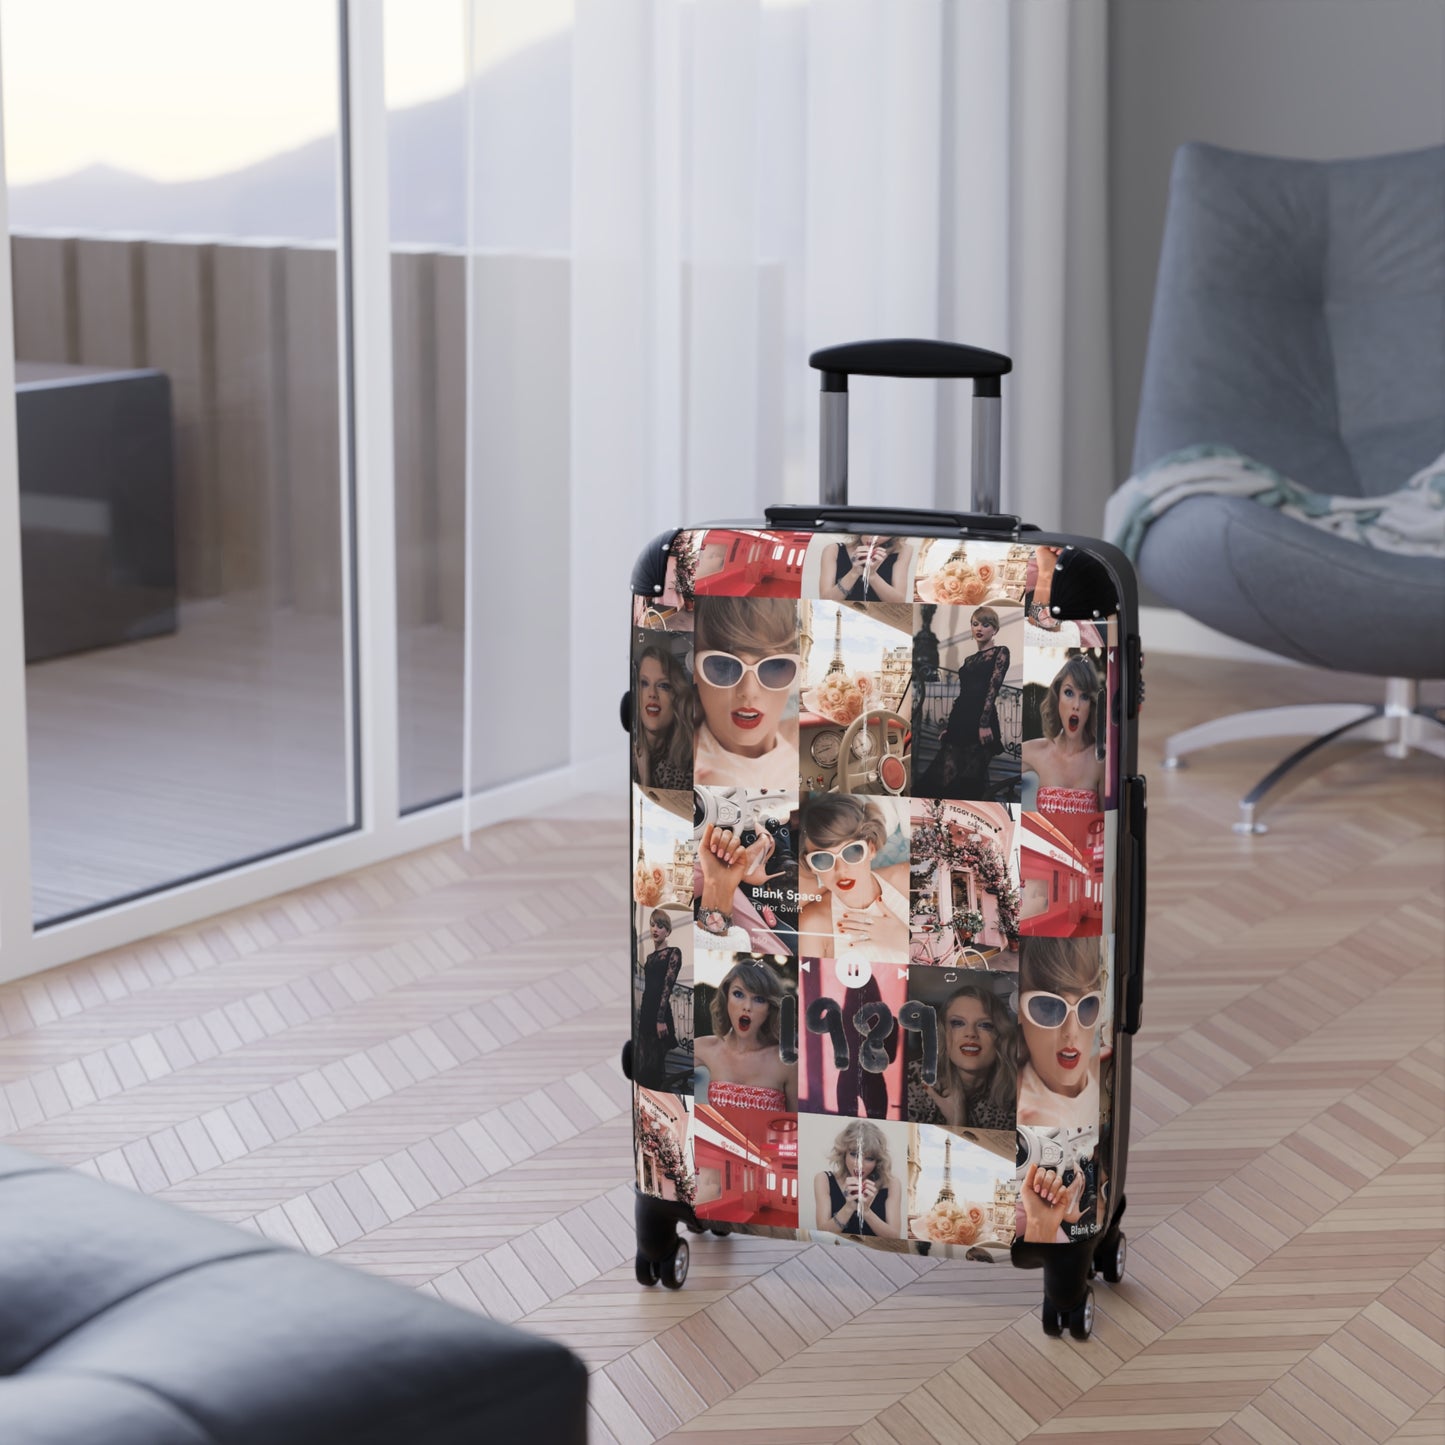 Taylor Swift 1989 Blank Space Collage Suitcase